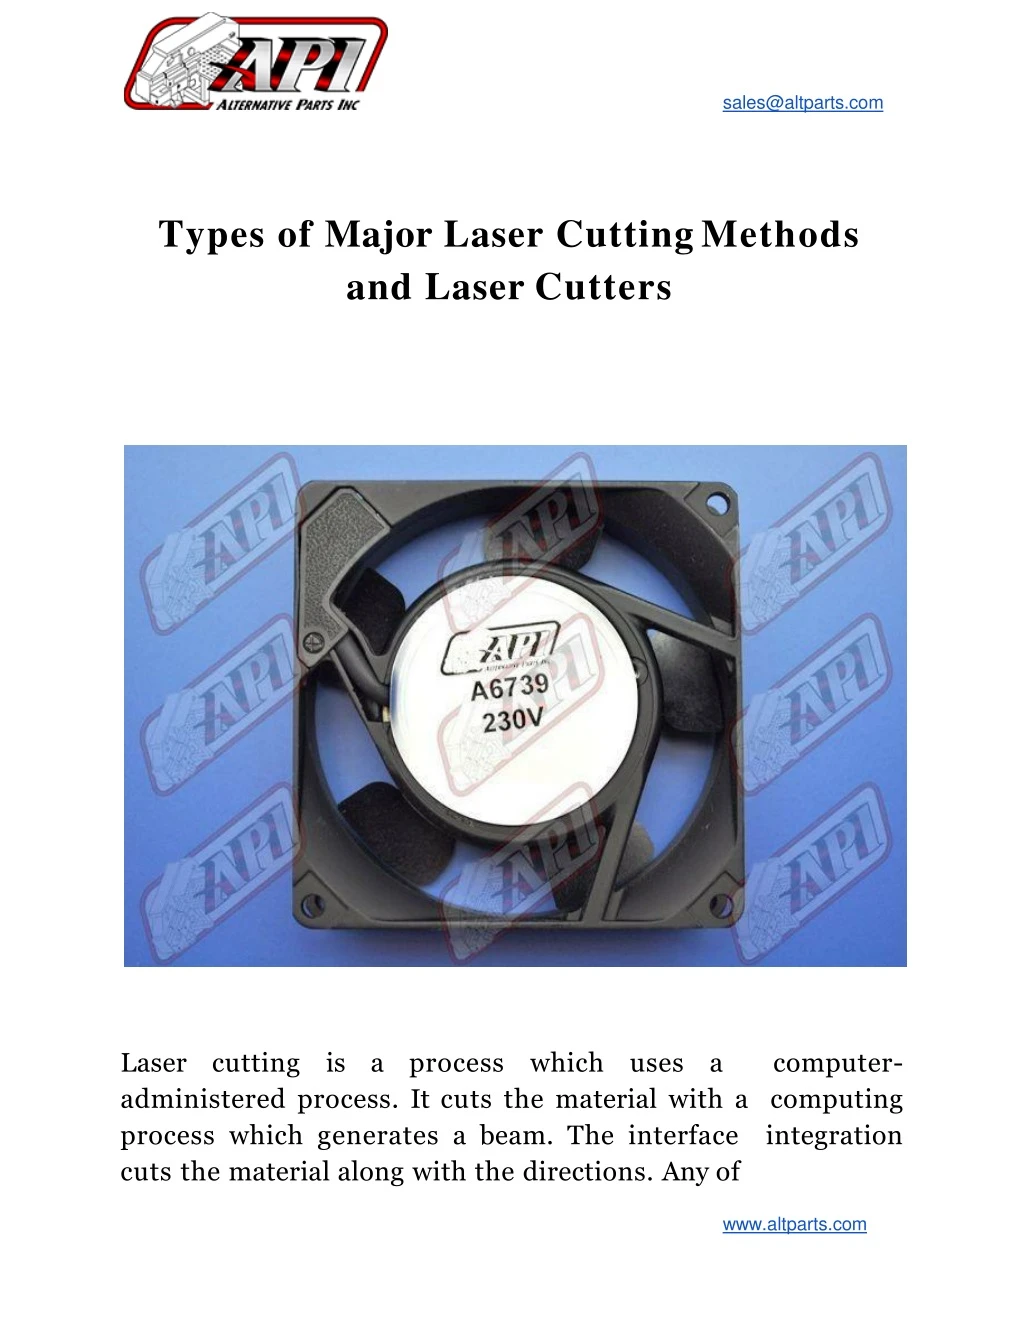 types of major laser cutting methods and laser cutters